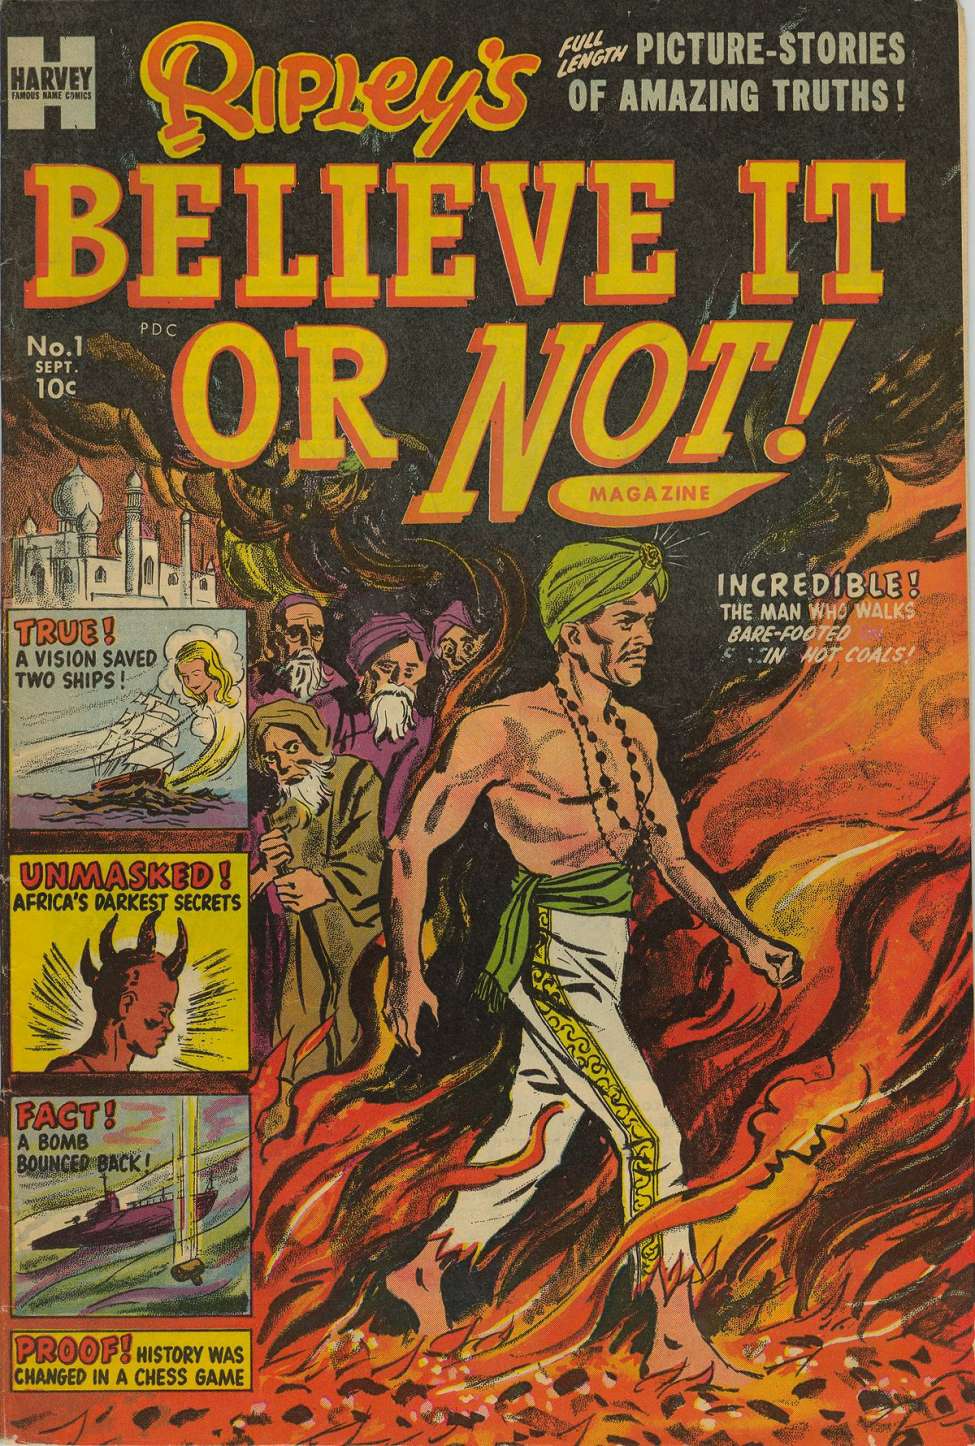 Book Cover For Ripley's Believe It Or Not 1